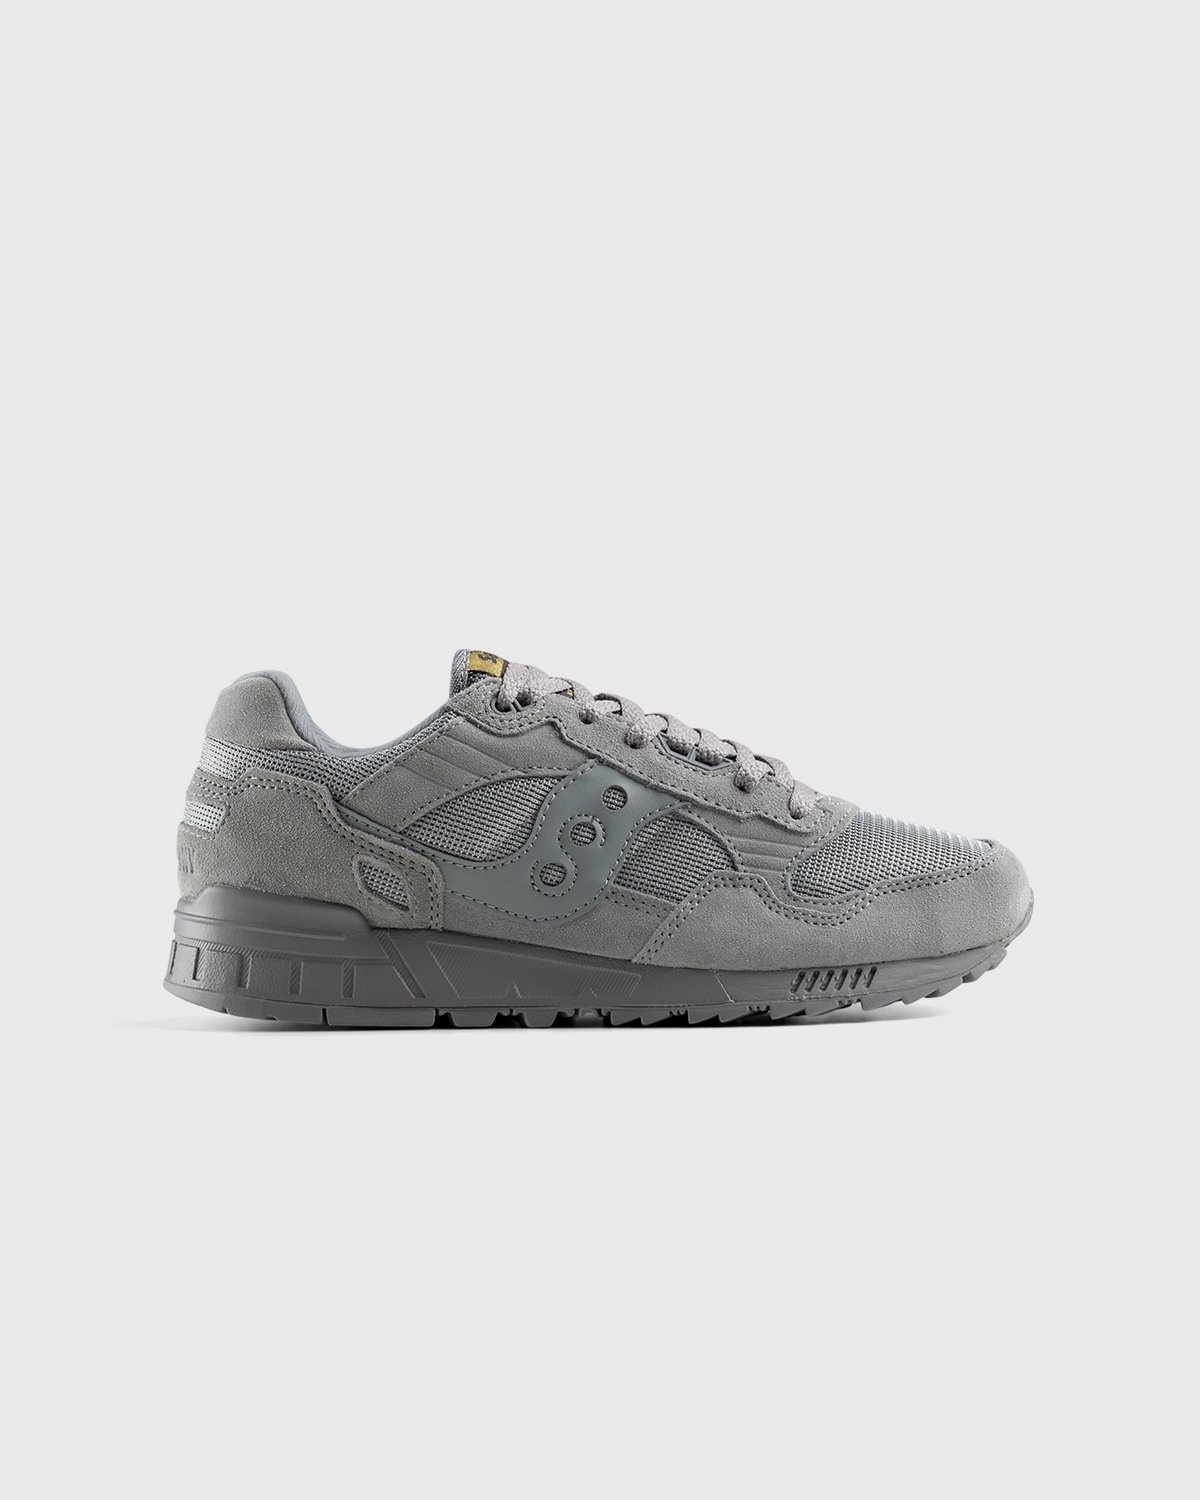 Saucony – Shadow 5000 Monument/Dove - Low Top Sneakers - Grey - Image 1